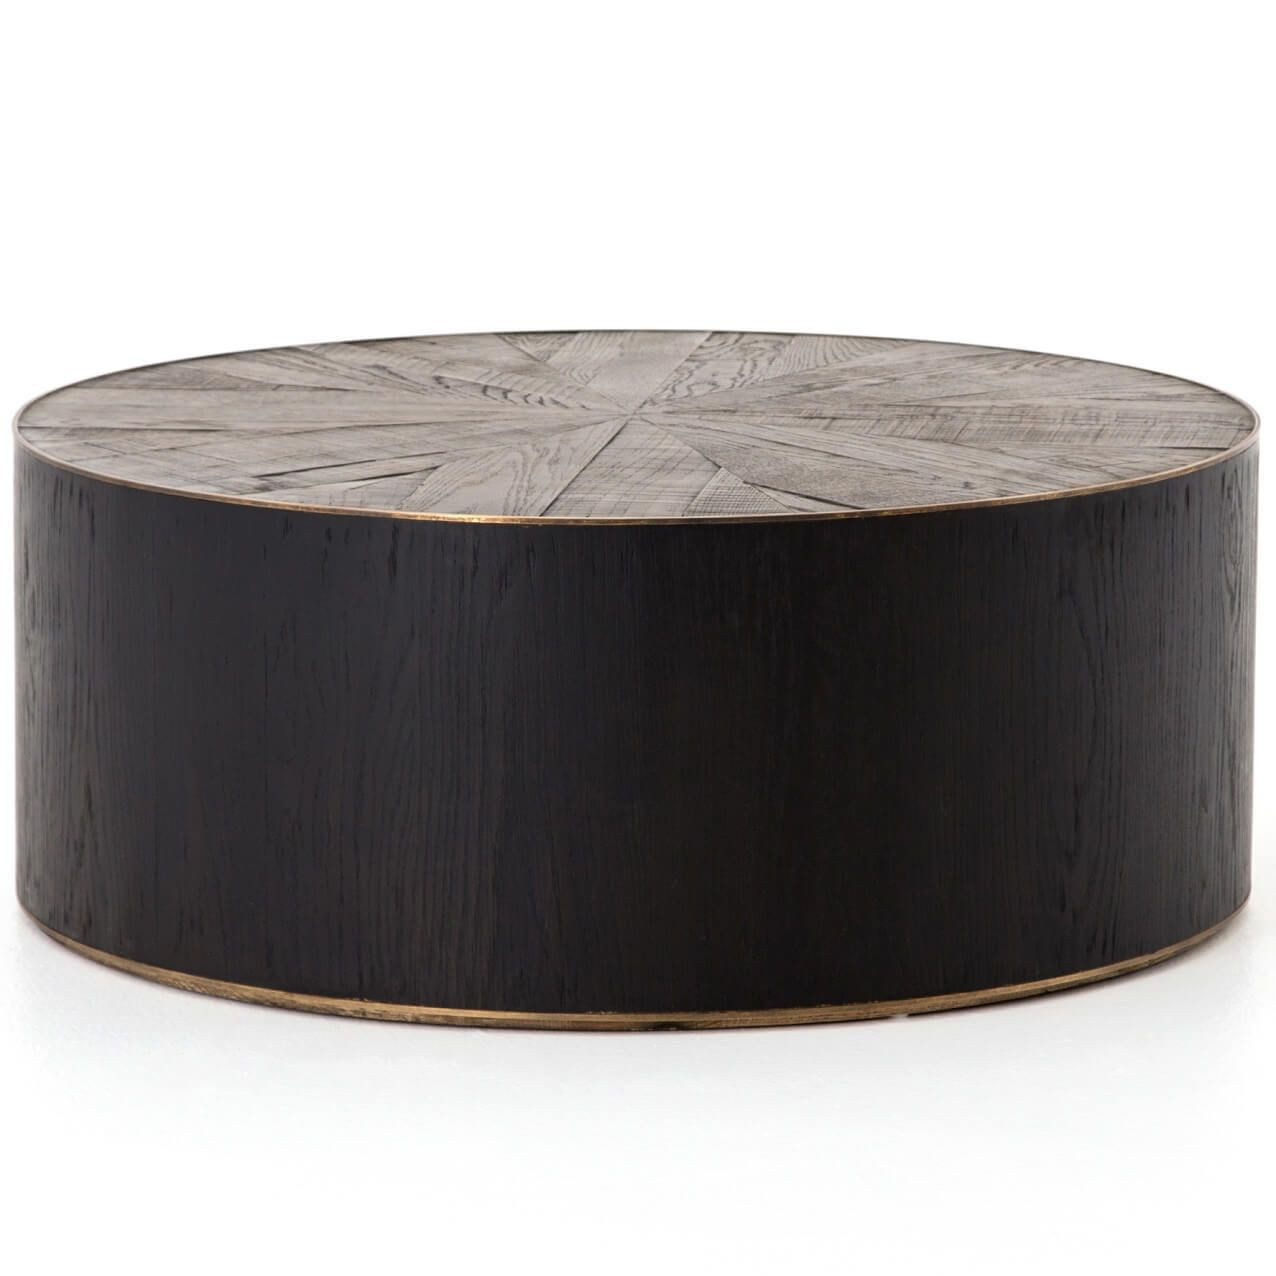 Drum Tables Living Room
 Perry Reclaimed Oak Round Drum Coffee Table 40" in 2020